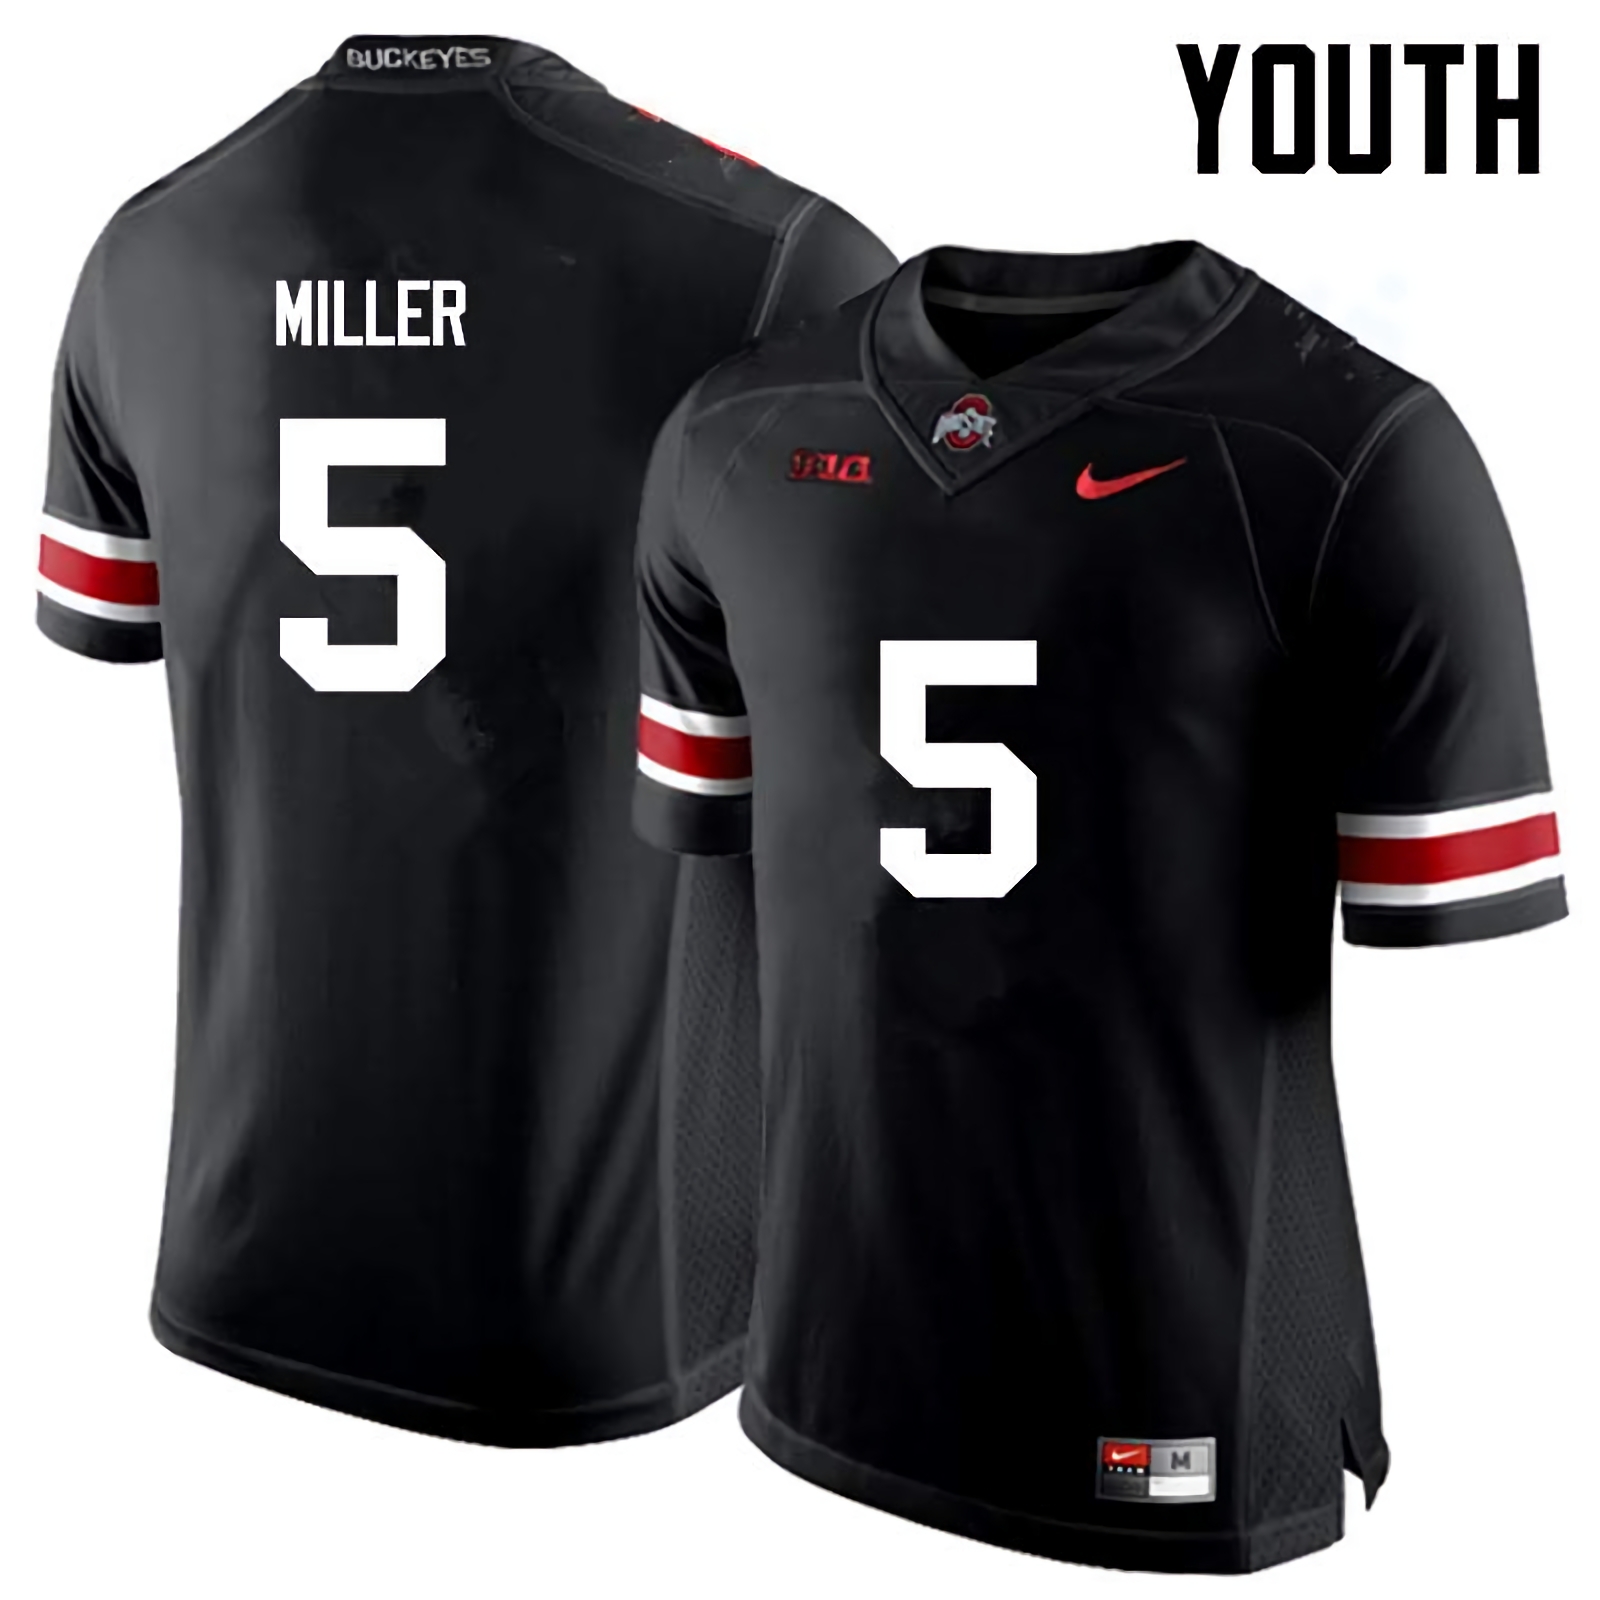 Braxton Miller Ohio State Buckeyes Youth NCAA #5 Nike Black College Stitched Football Jersey HJO8656WT